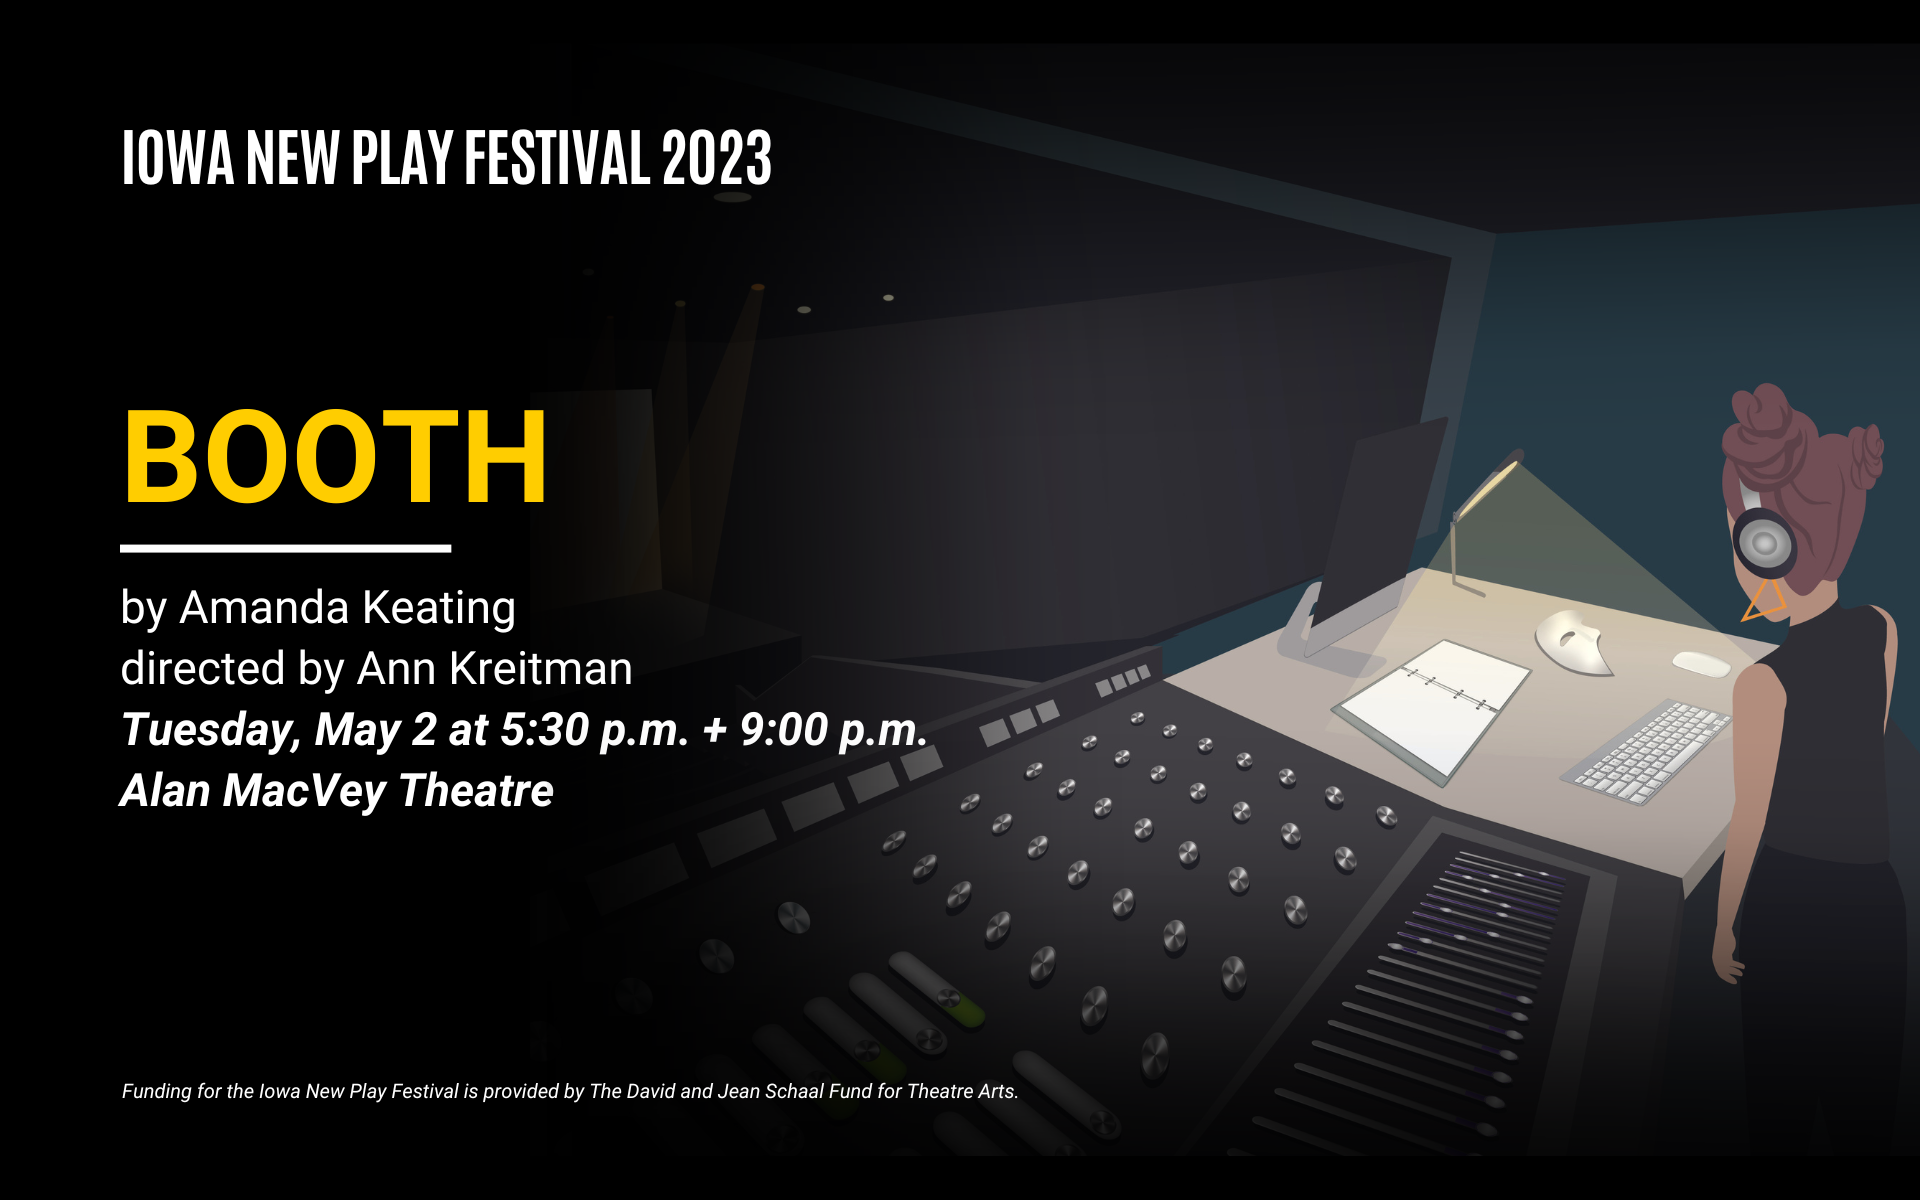 Iowa New Play Festival 2023 - BOOTH